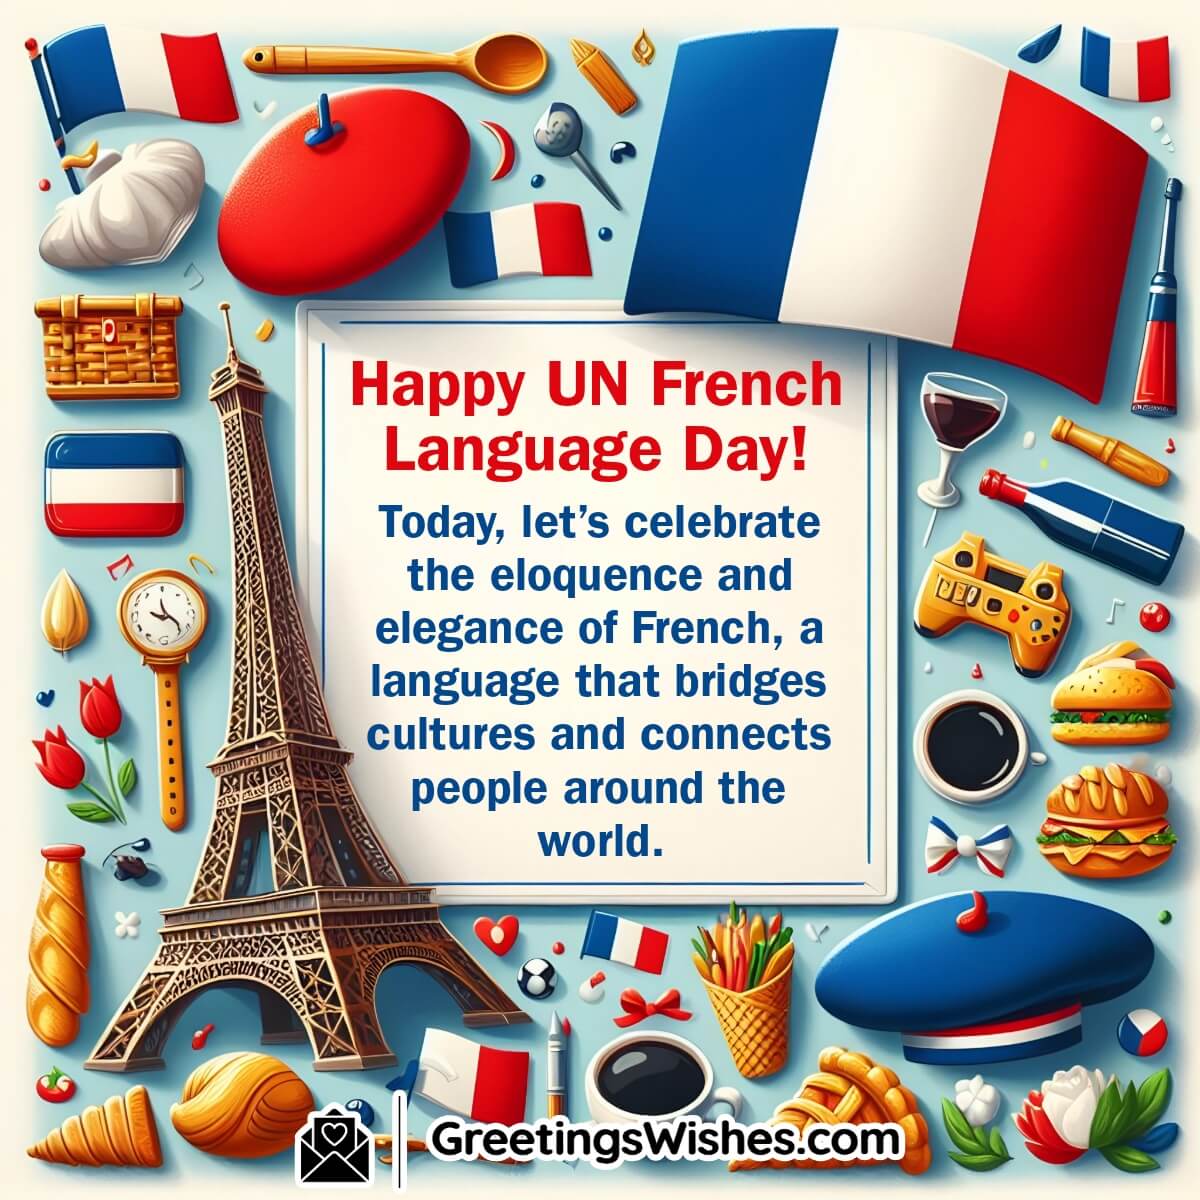 Un French Language Day Messages